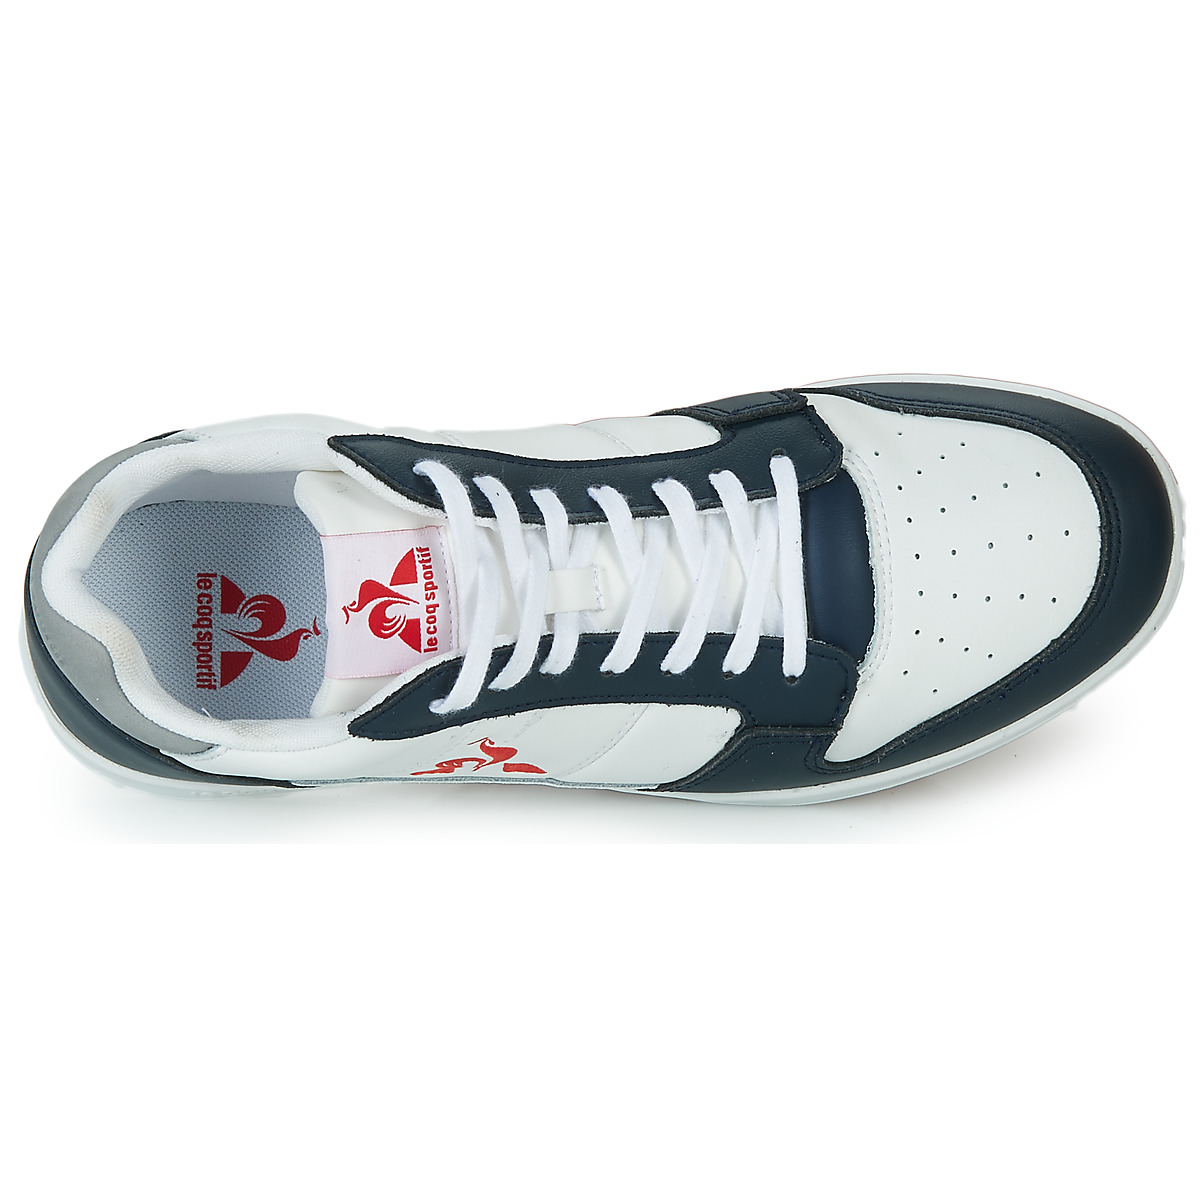 Le Coq Sportif Blanc / Marine BREAKPOINT TRICOLORE ofsVcSlK